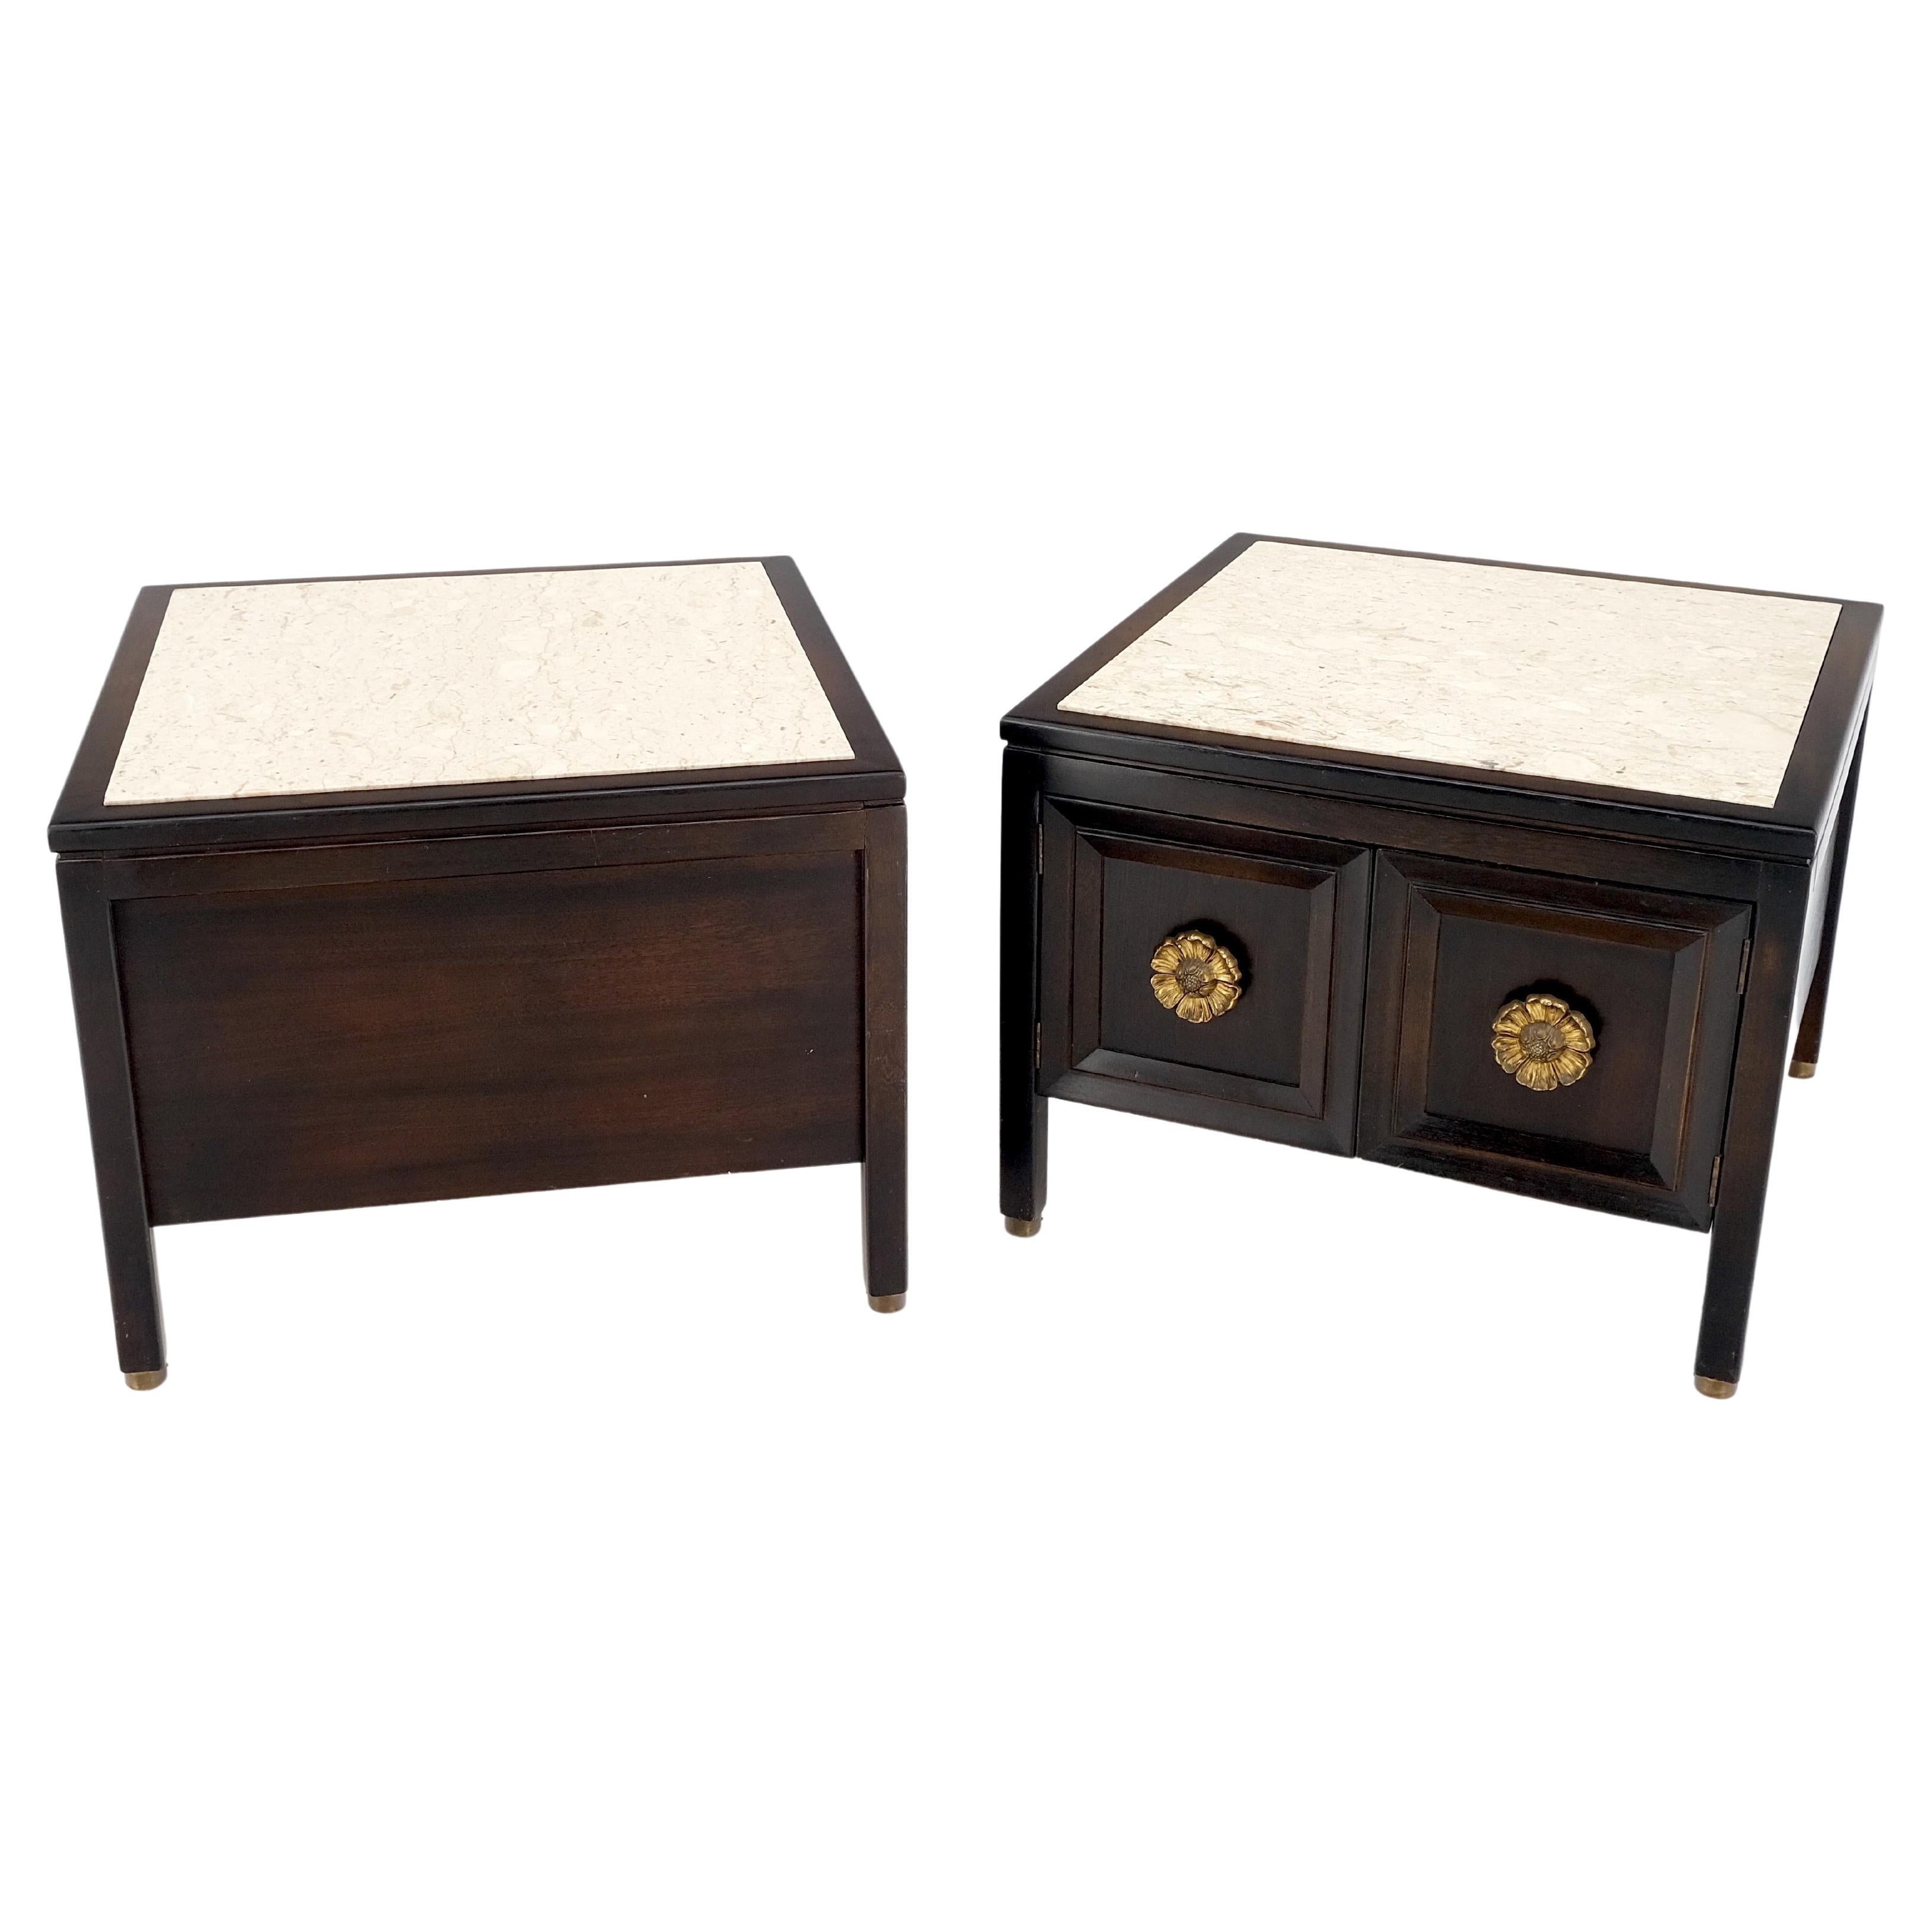 Pair Square Marble Top 2 Door Nightstands End Tables Large Decorative Pulls Mint For Sale